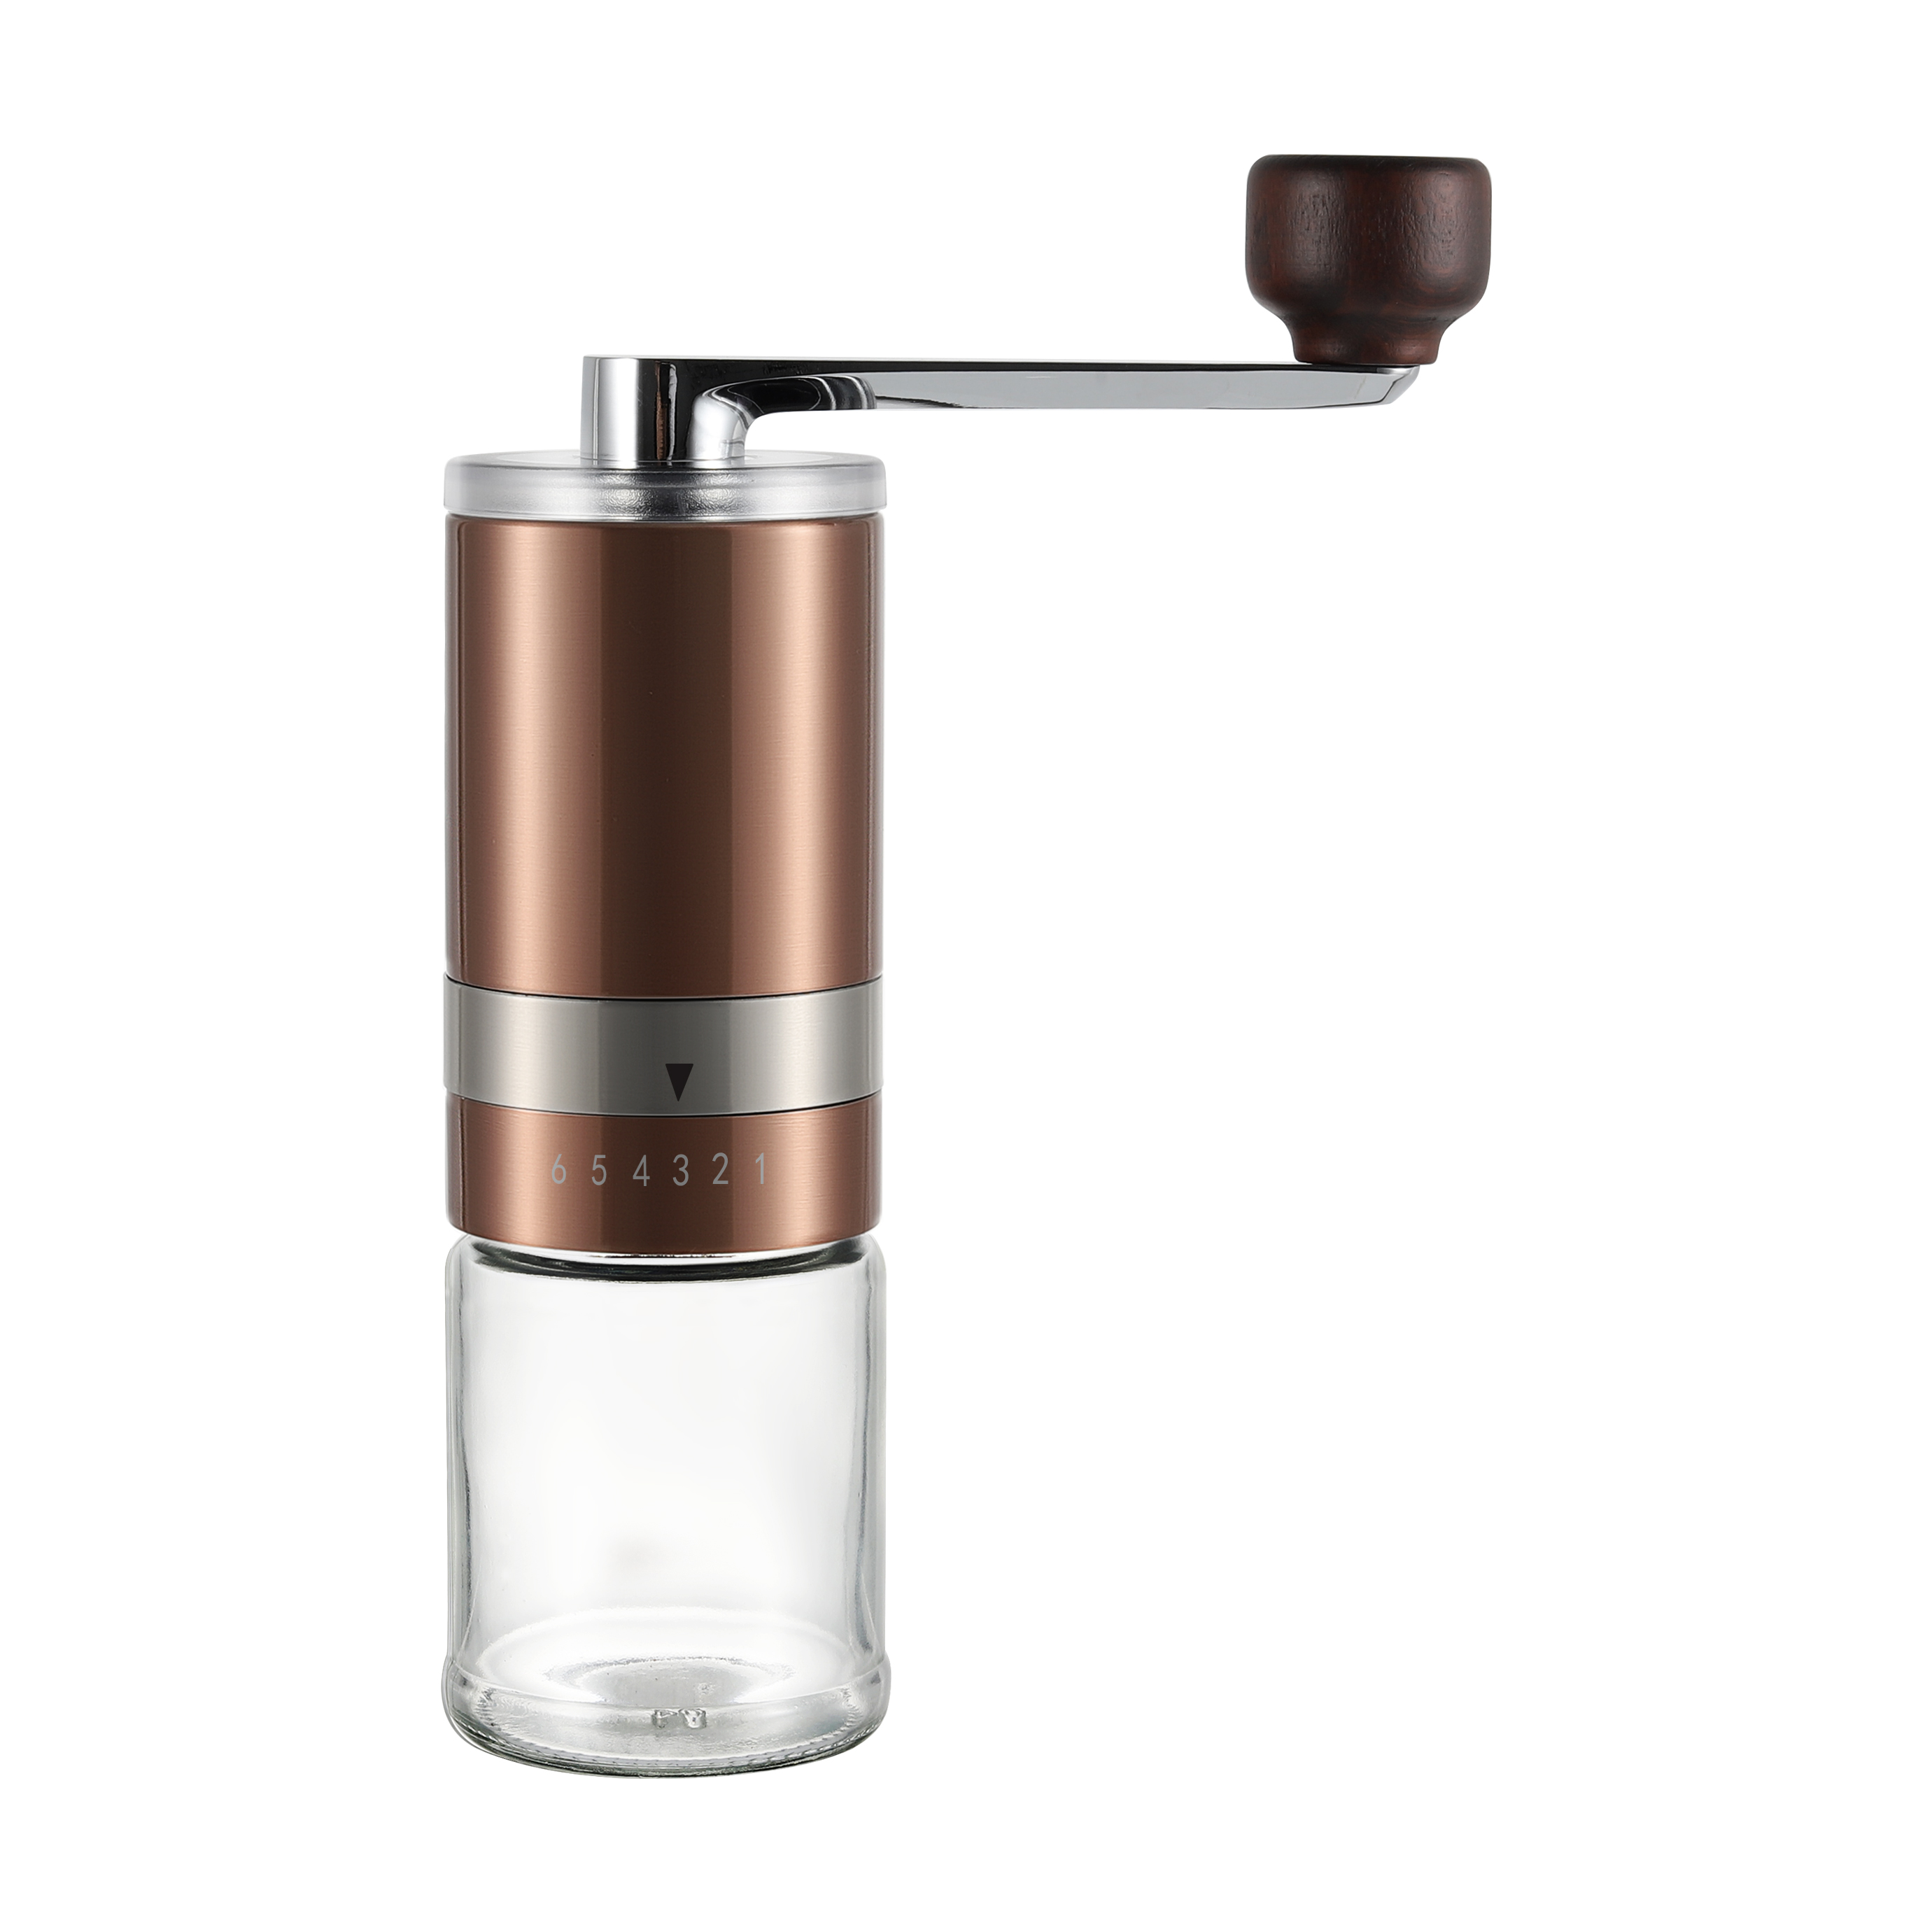 Customized Manual Coffee Grinder with Glass Bottle 1